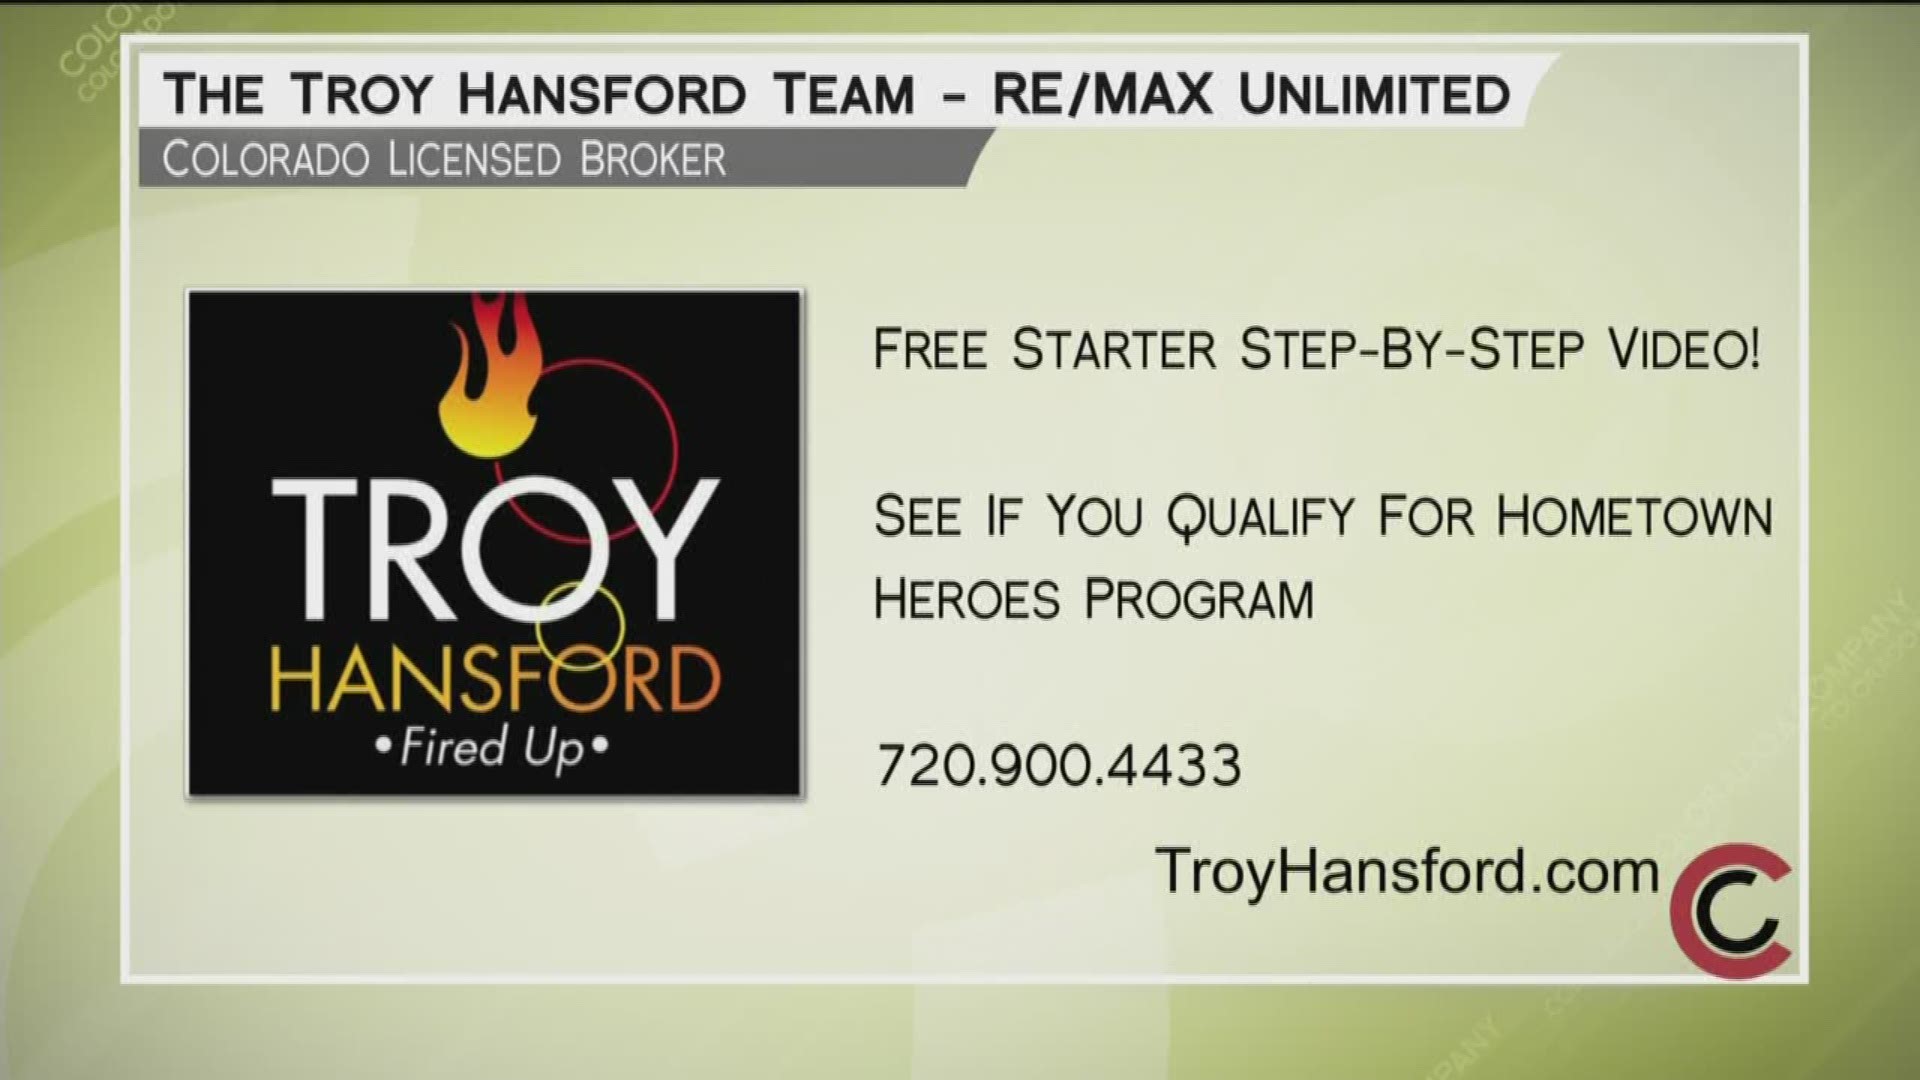 Let the Troy Hansford team ignite your real estate plans into action. Call 720.900.4433 or visit TroyHansford.com to get started.